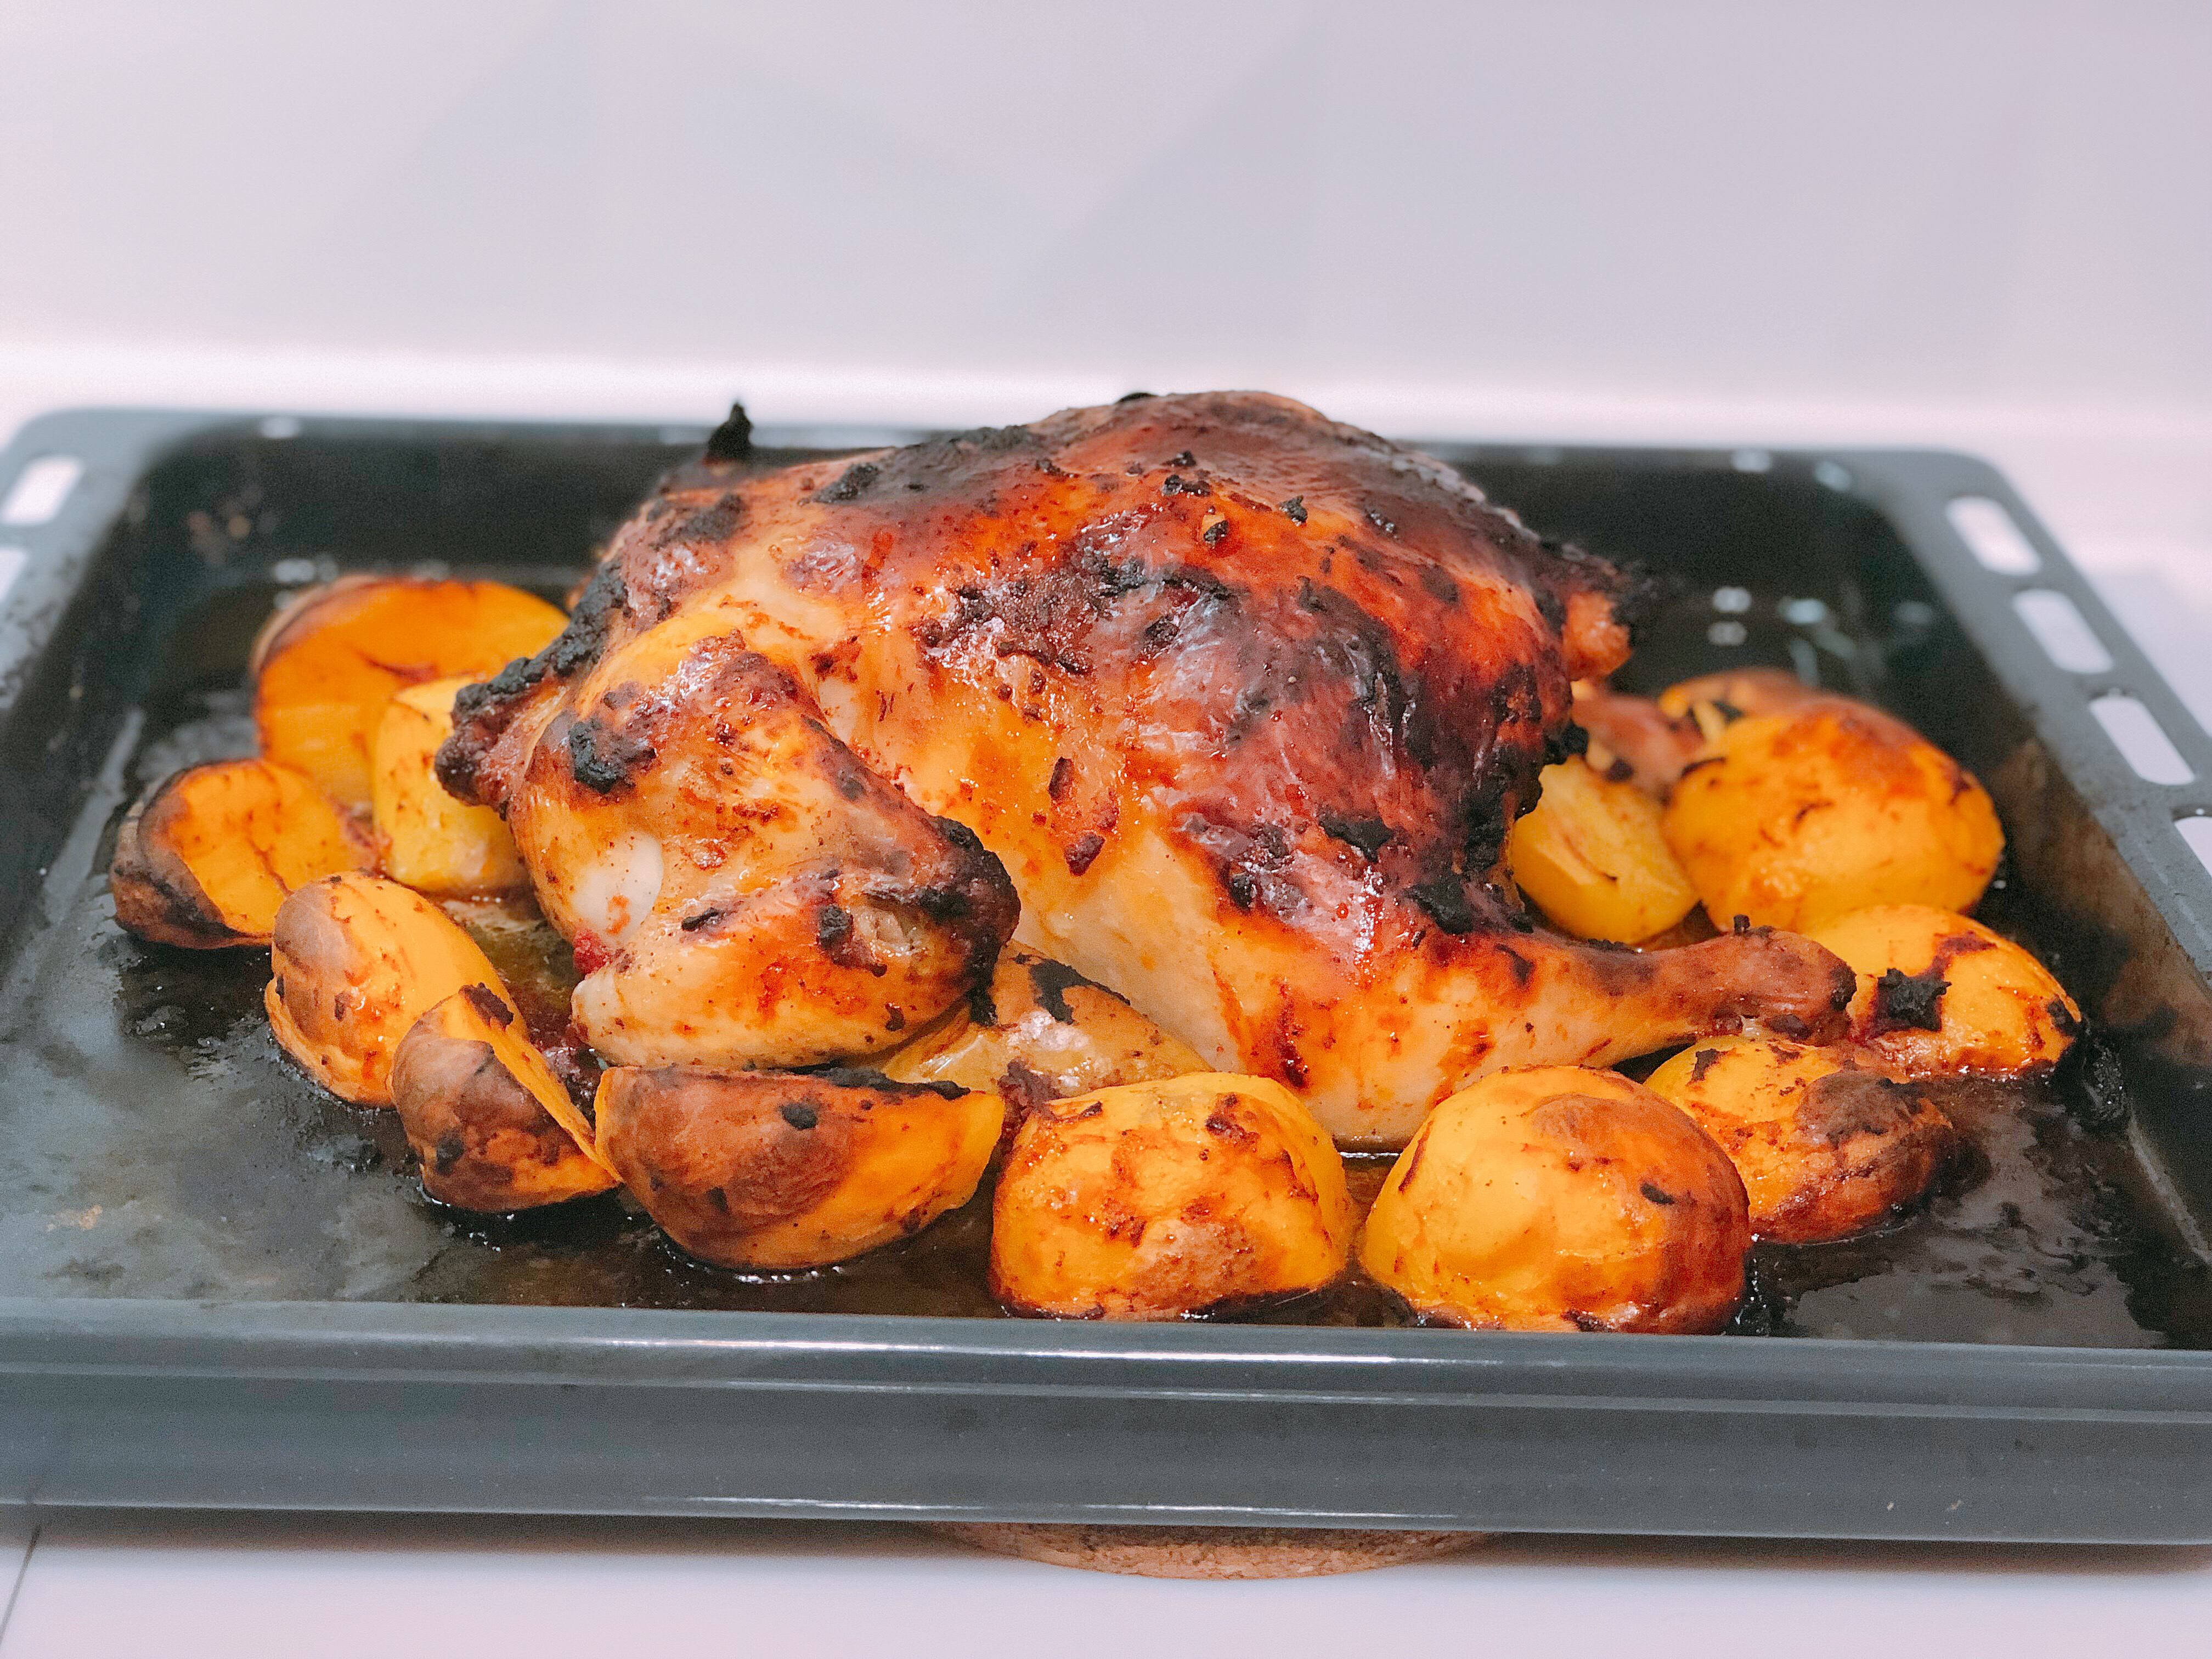 What to cook for family dinner - whole roasted chicken recipe is here to help!